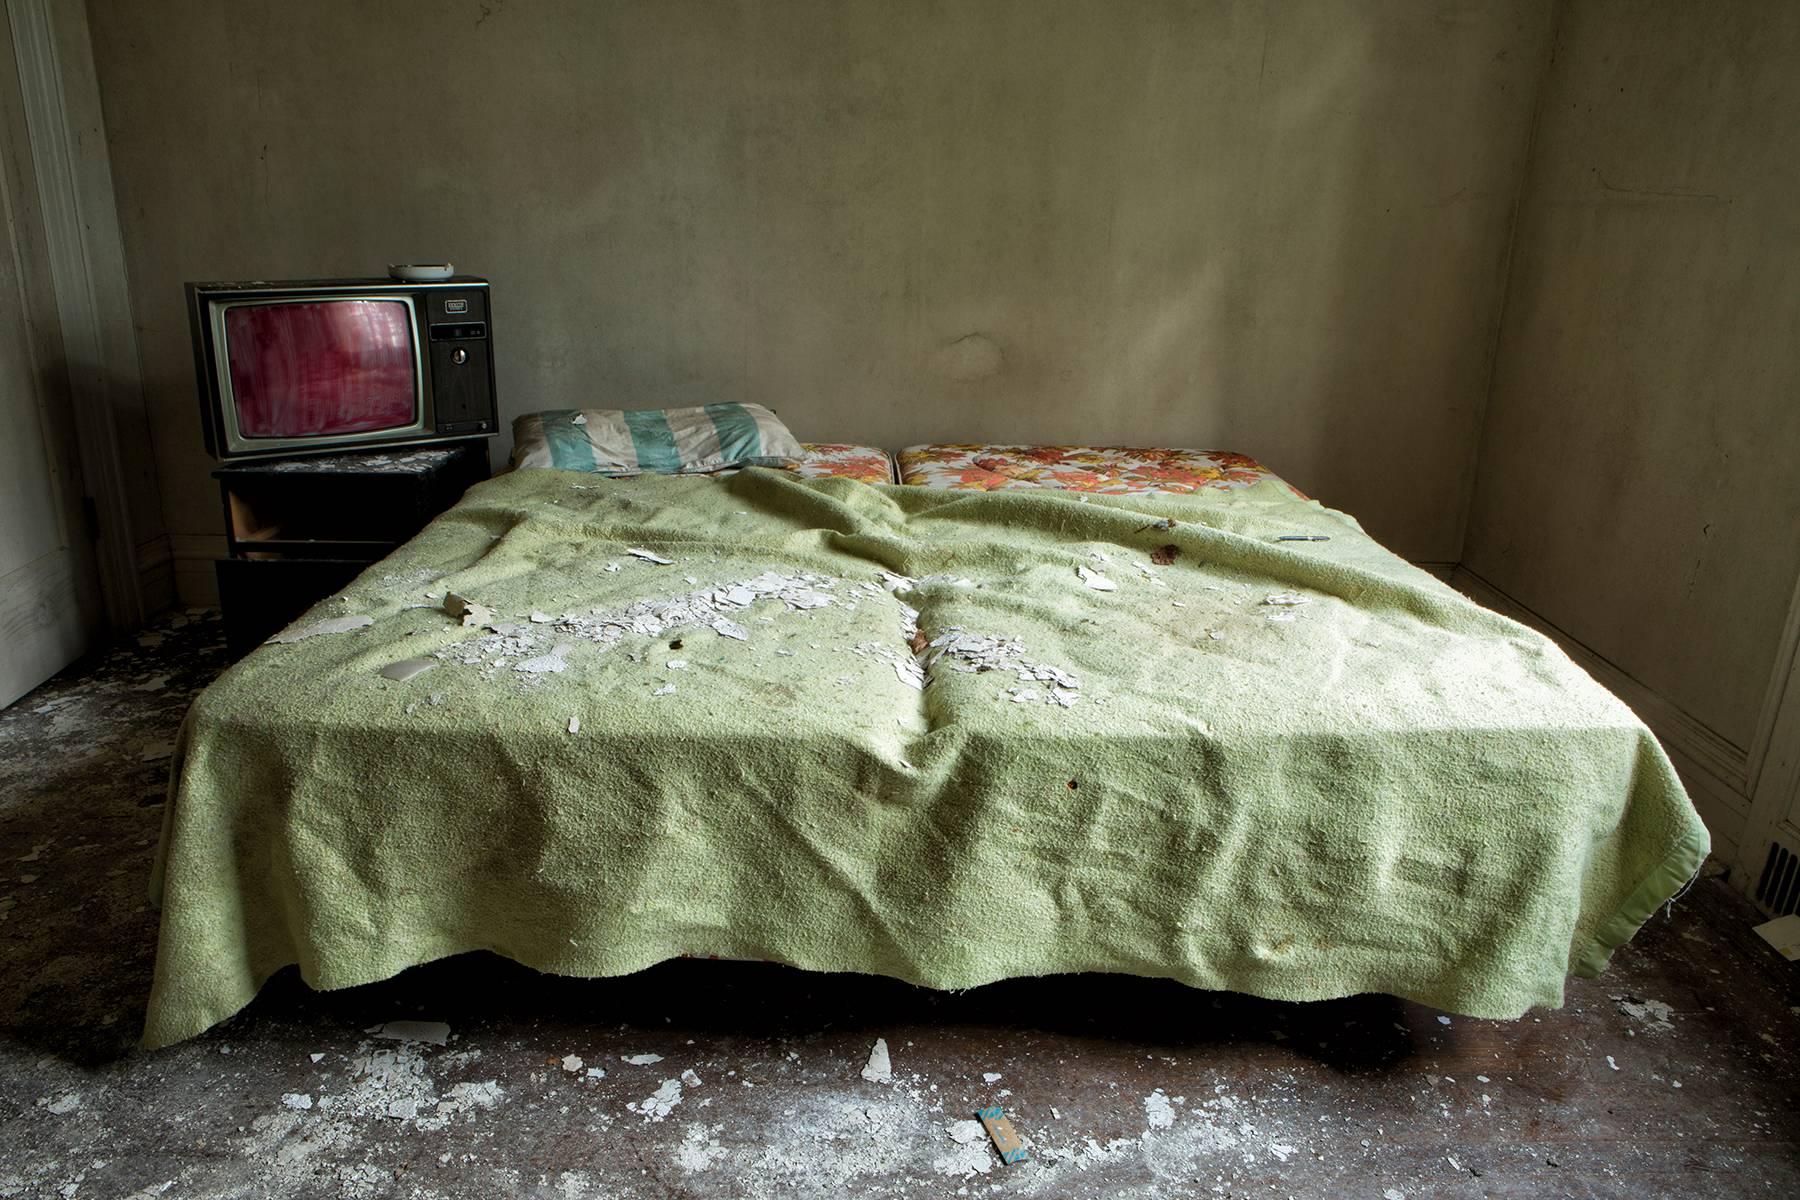 "Exhausted", contemporary, abandoned, bed, television, green, color photograph - Photograph by Rebecca Skinner